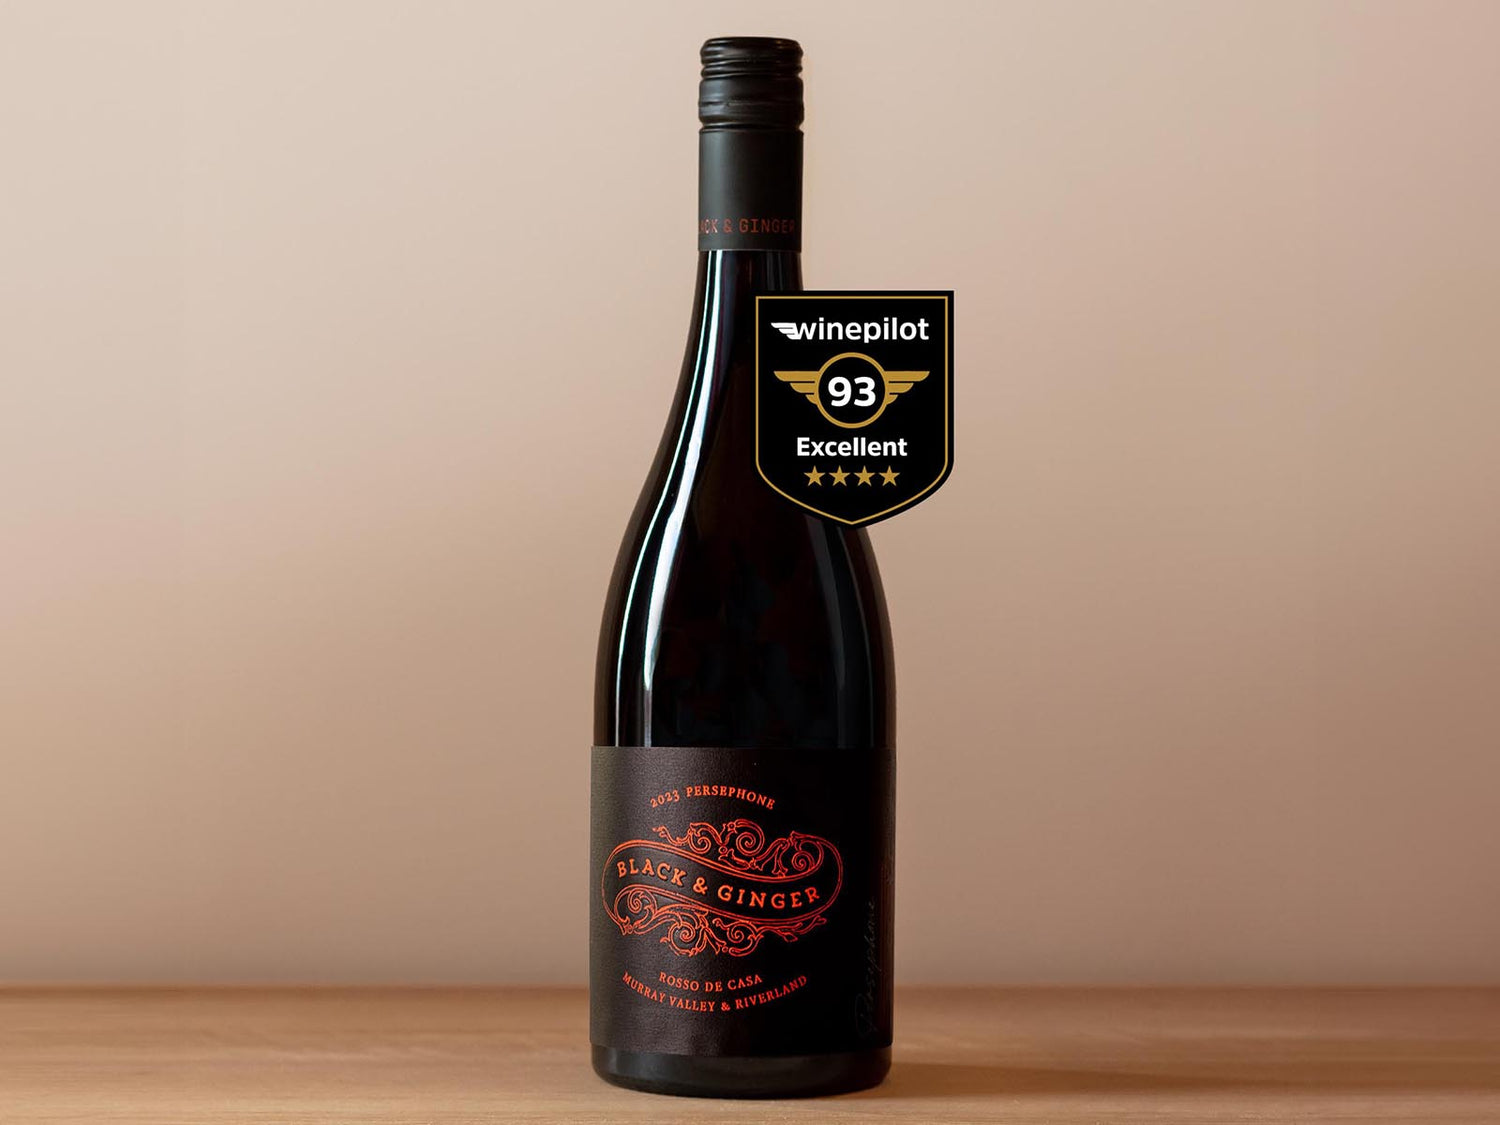 Black and Ginger, Rosso de Casa, Italian Red Blend, 93 points WinePilot